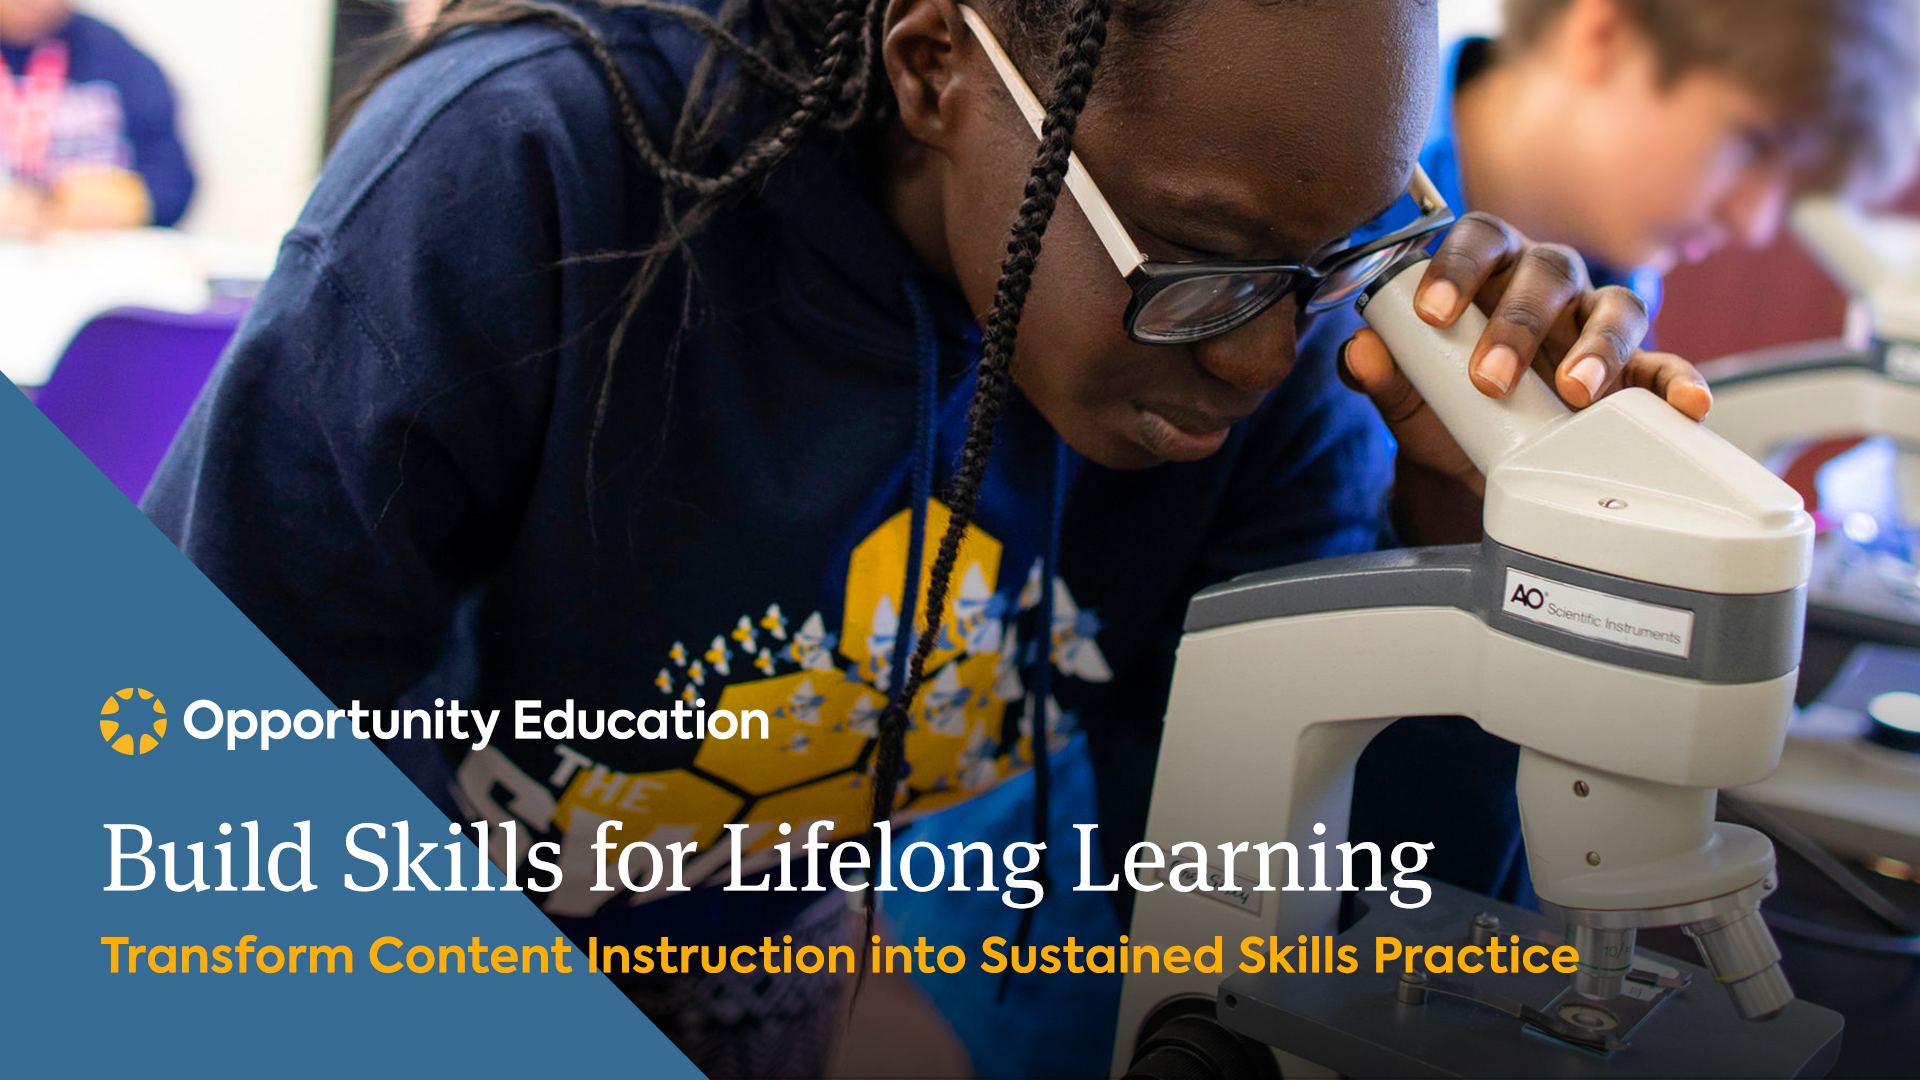 Join Opportunity Education to learn how to transform content learning into sustained skills practice at your high school.